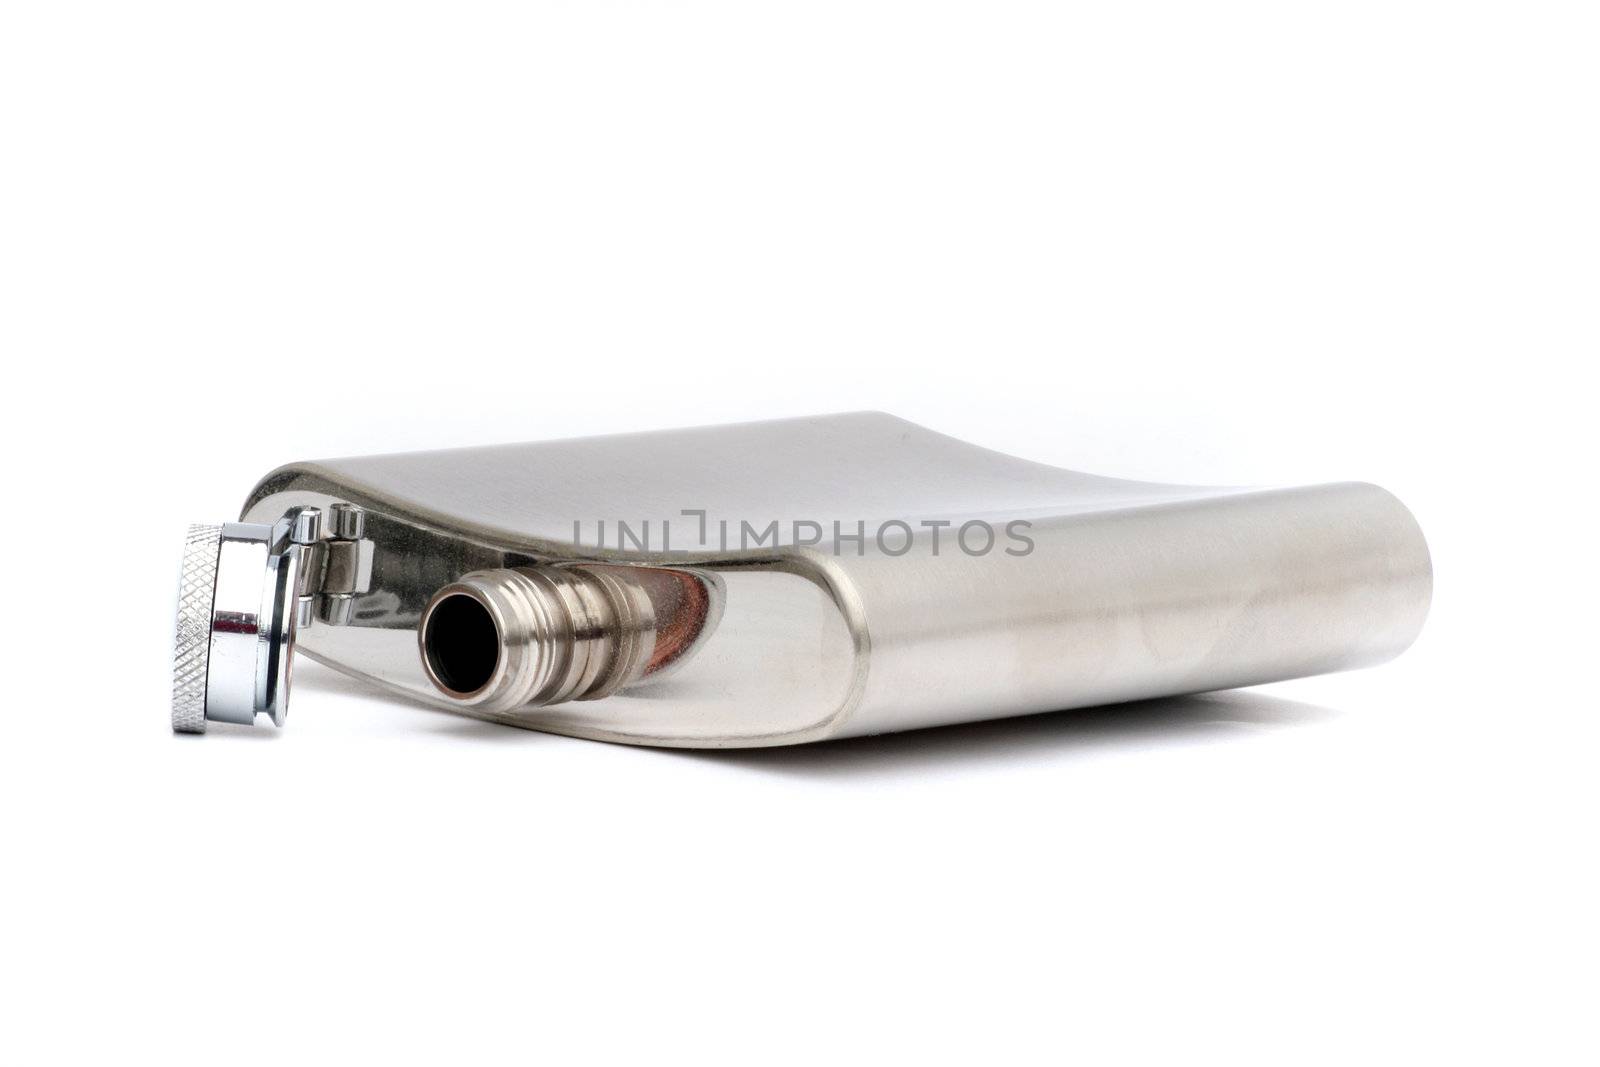 A hip flask isolated on a plain white background.